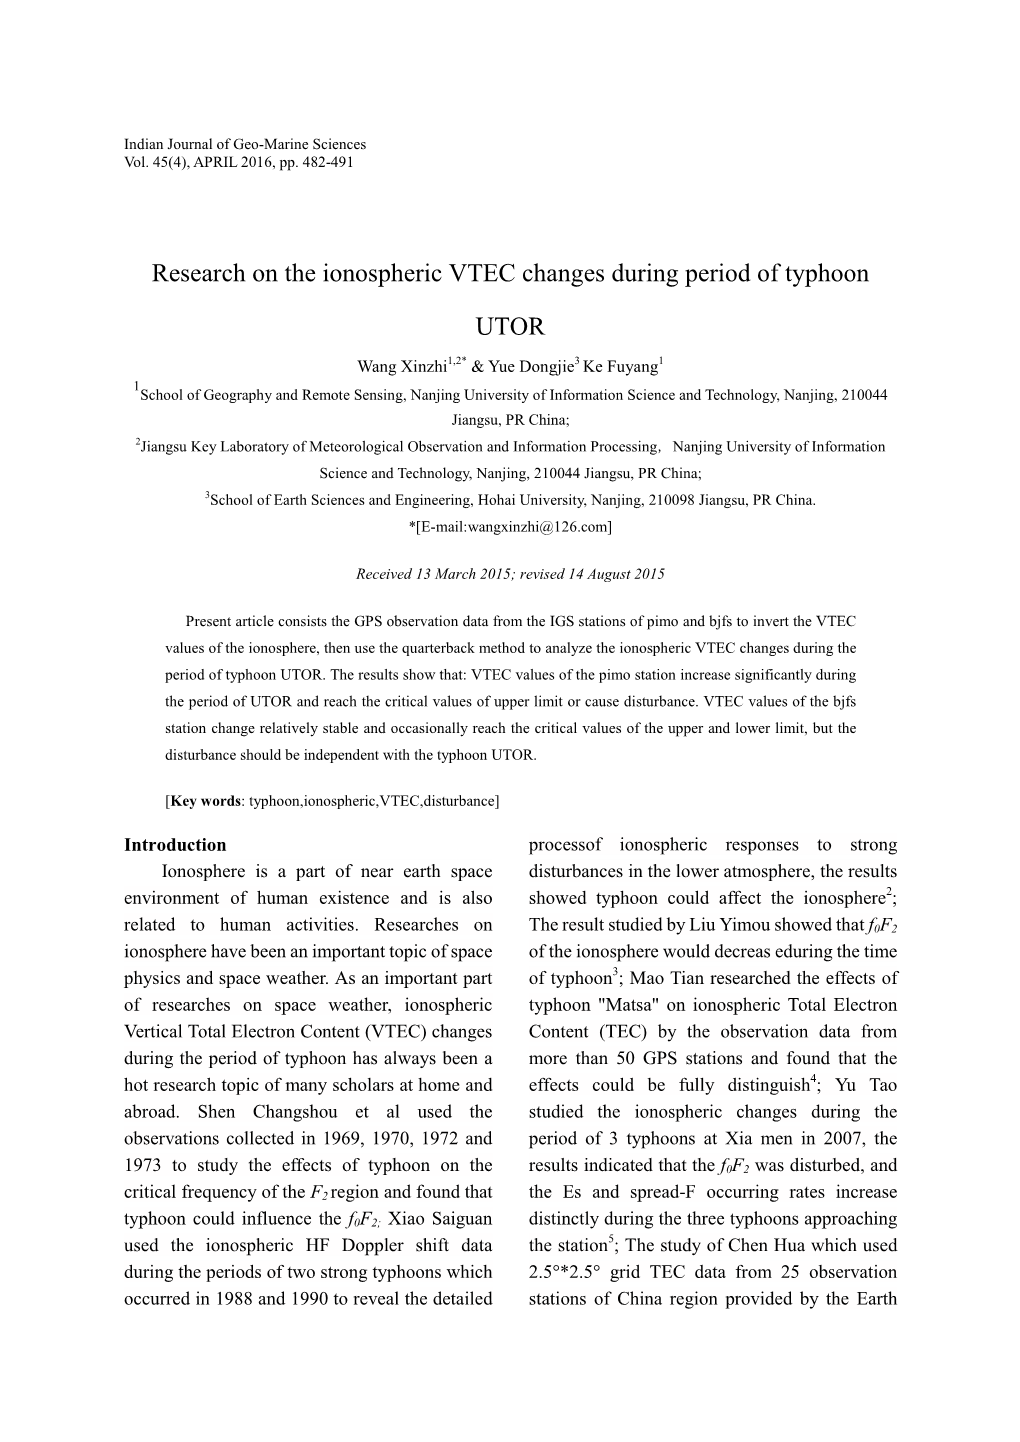 Research on the Ionospheric VTEC Changes During Period of Typhoon UTOR